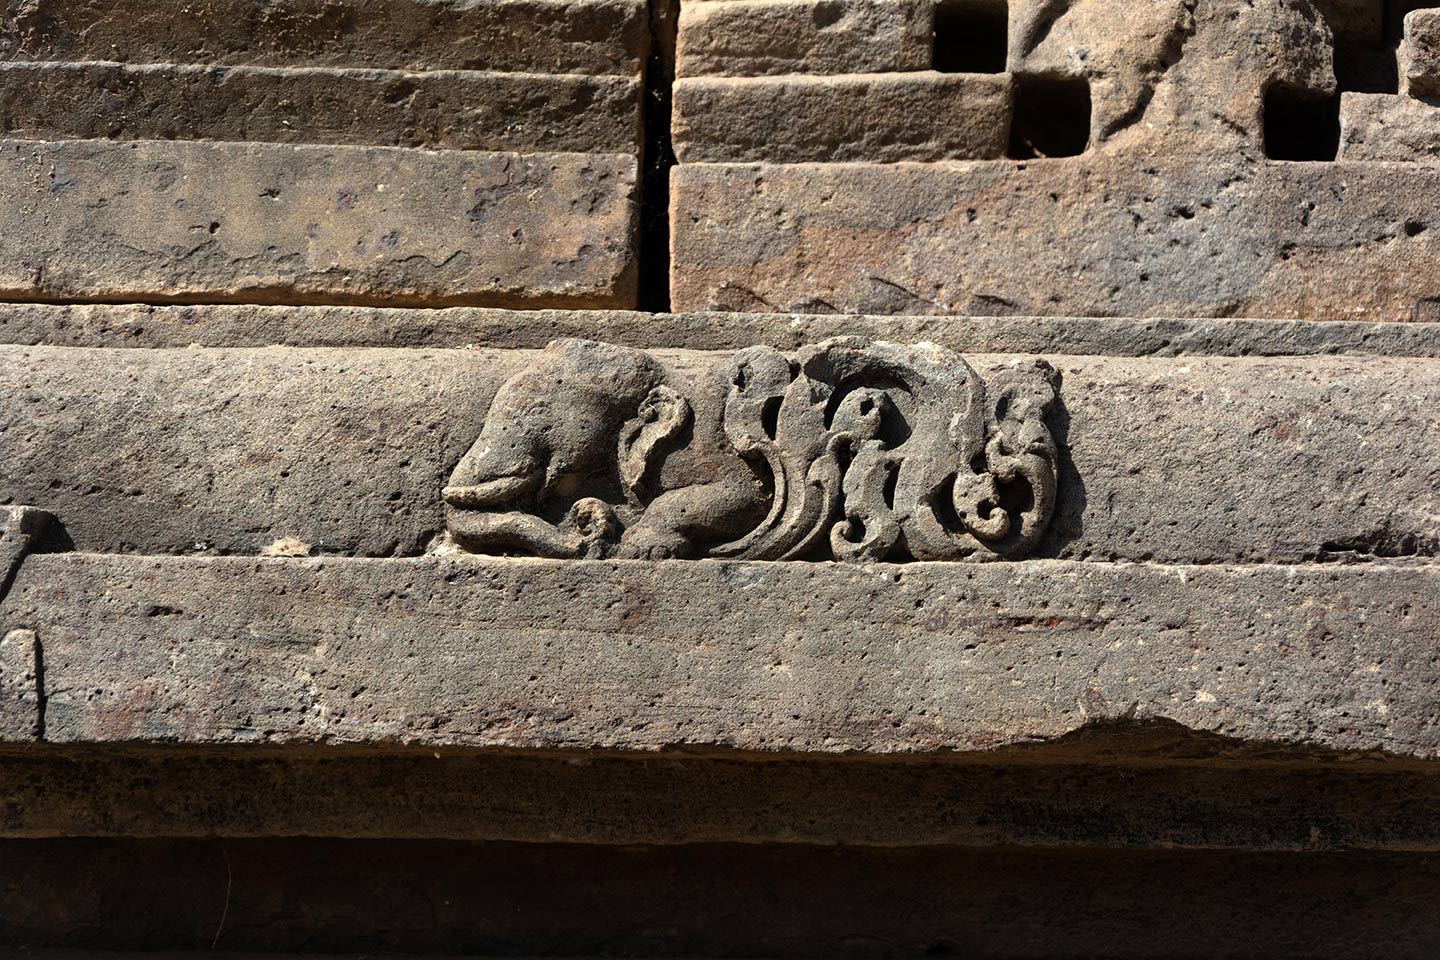 Relief carving of hybrid creatures like kinnaras, vyalas, and makara feature all around the adhisthana. Seen here is a carving of gaja vyala (elephant with wings).